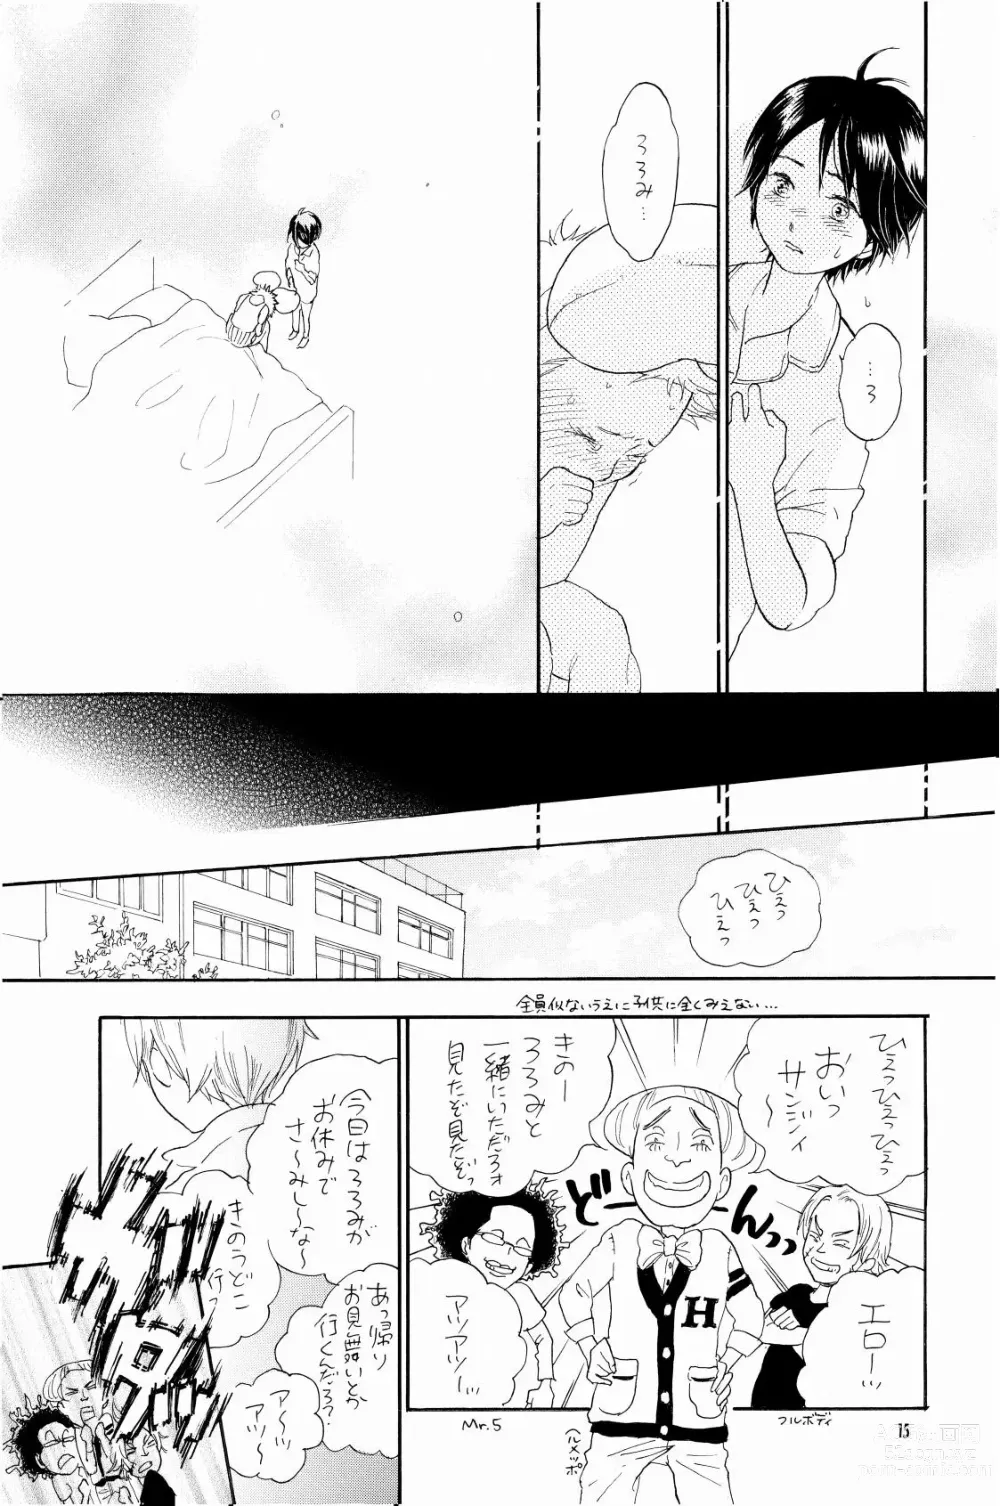 Page 14 of doujinshi your song